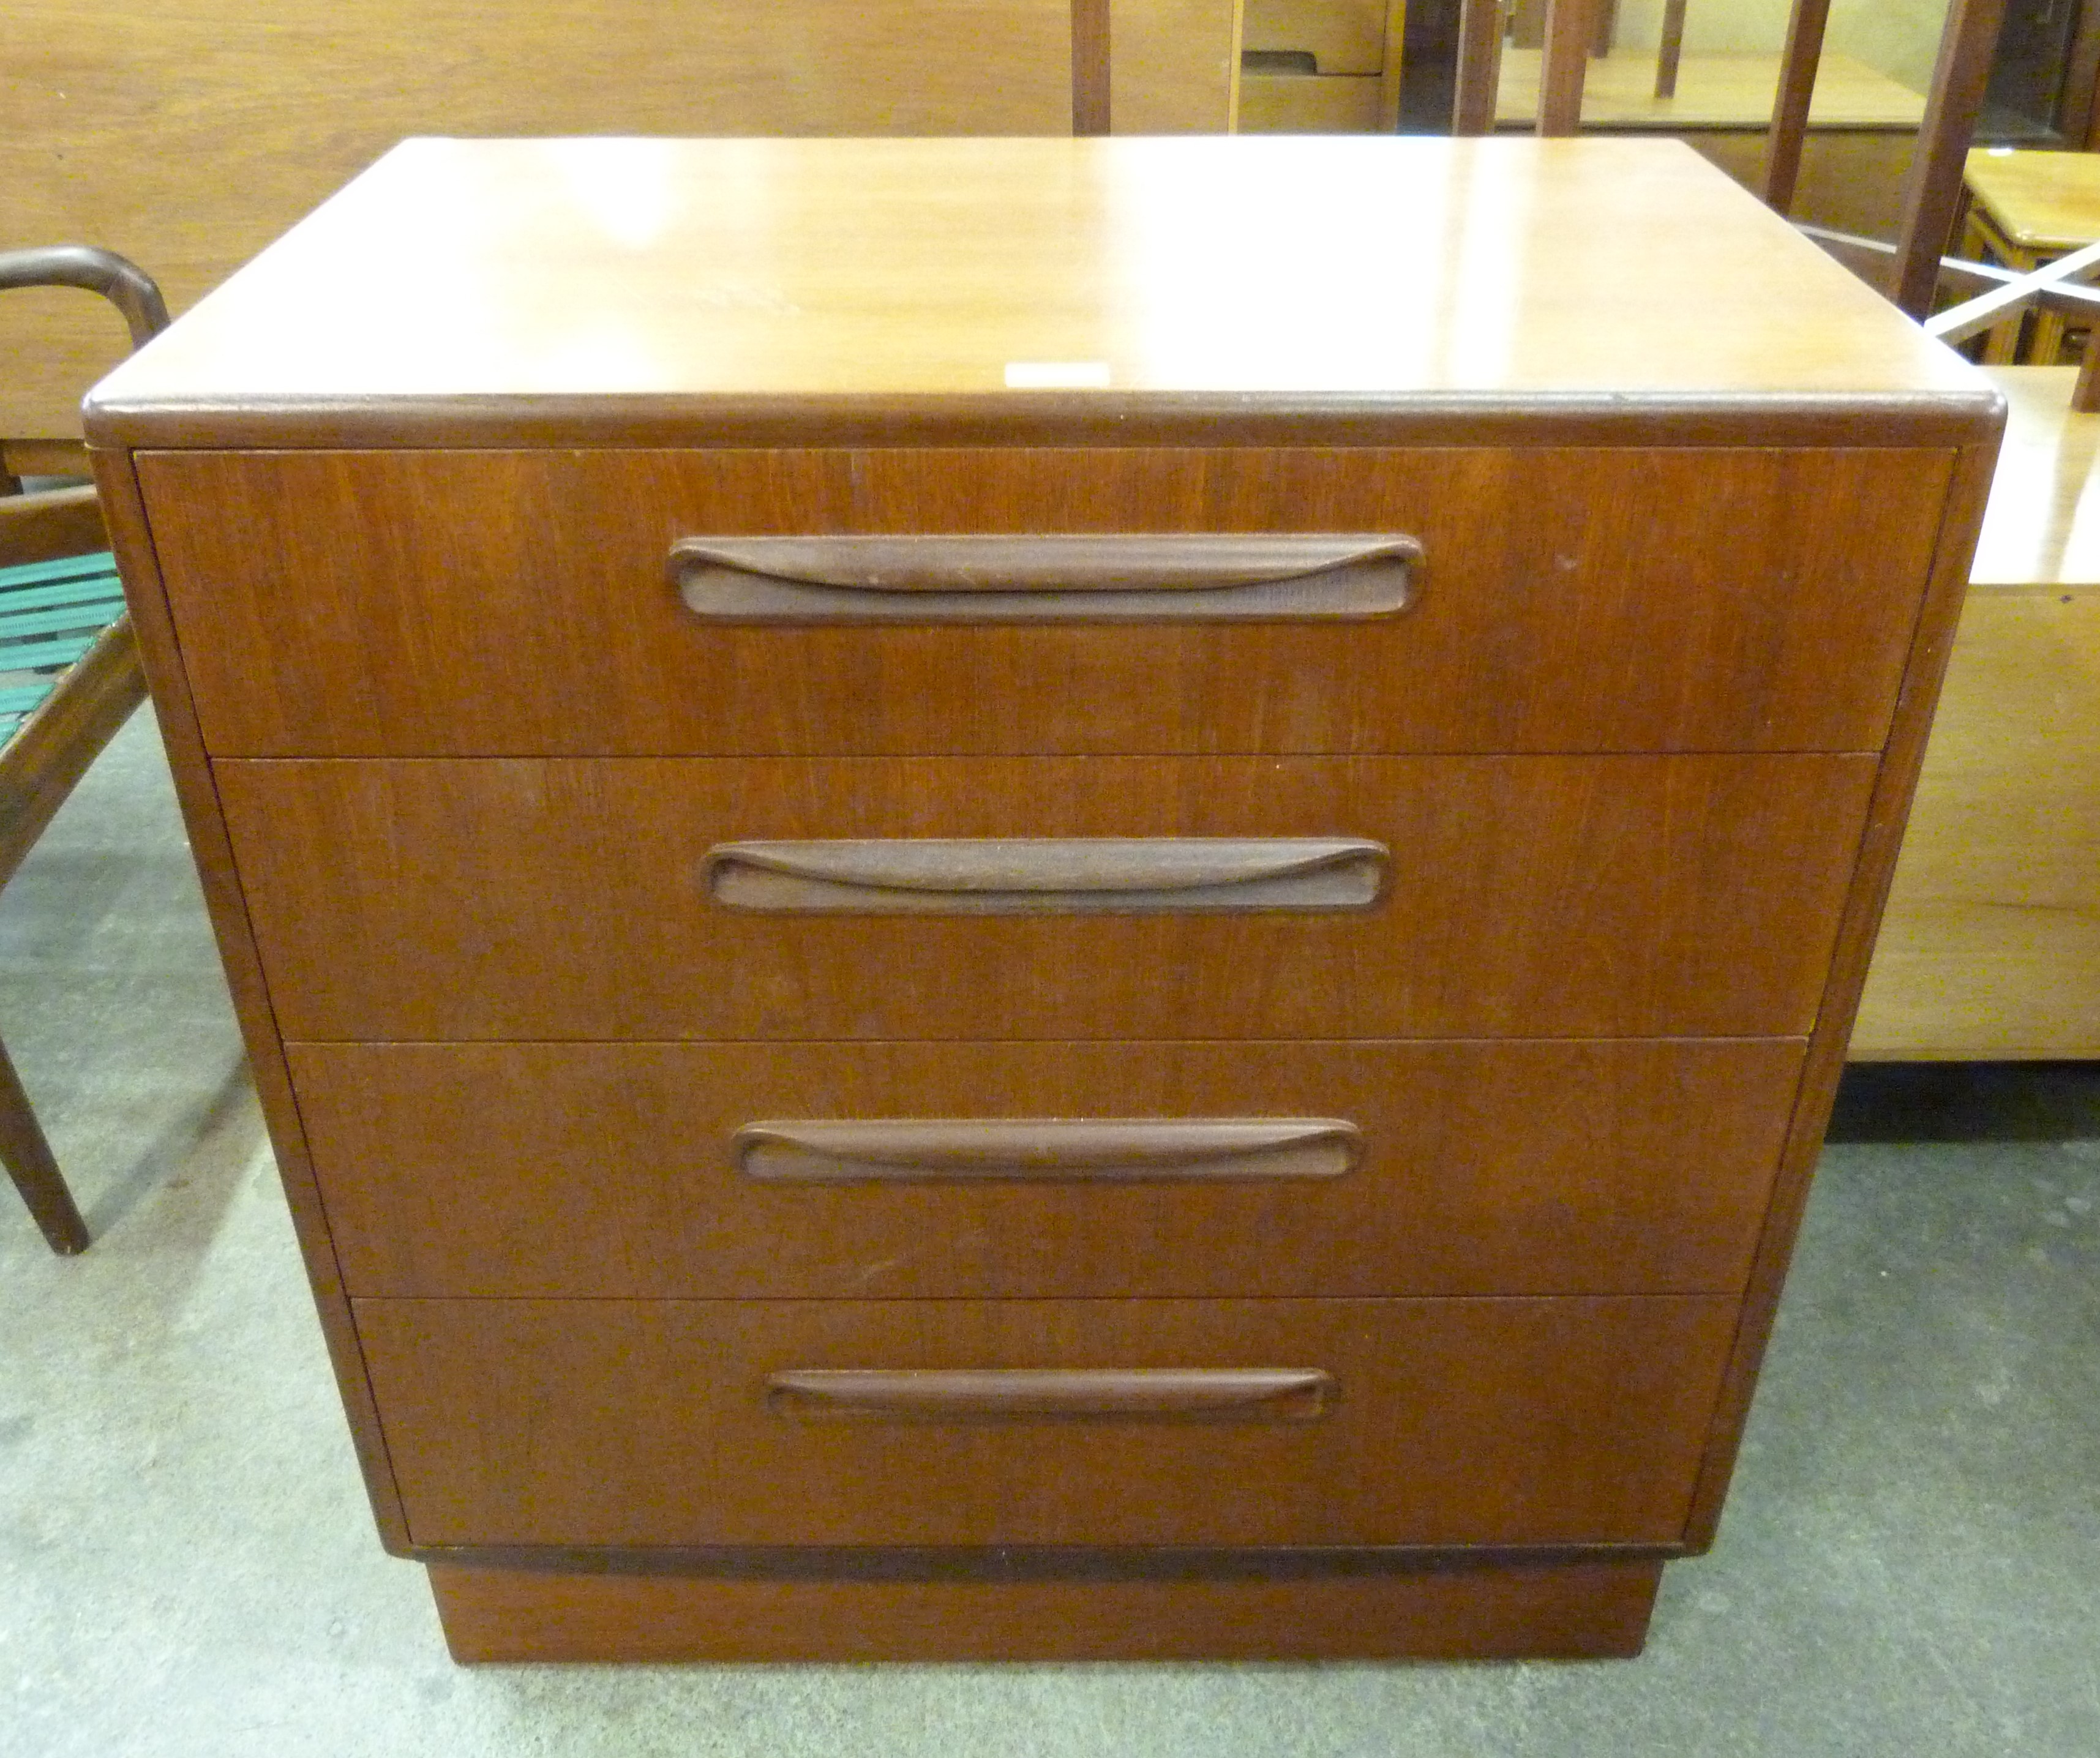 A G-Plan Fresco teak chest of drawers - Image 3 of 3